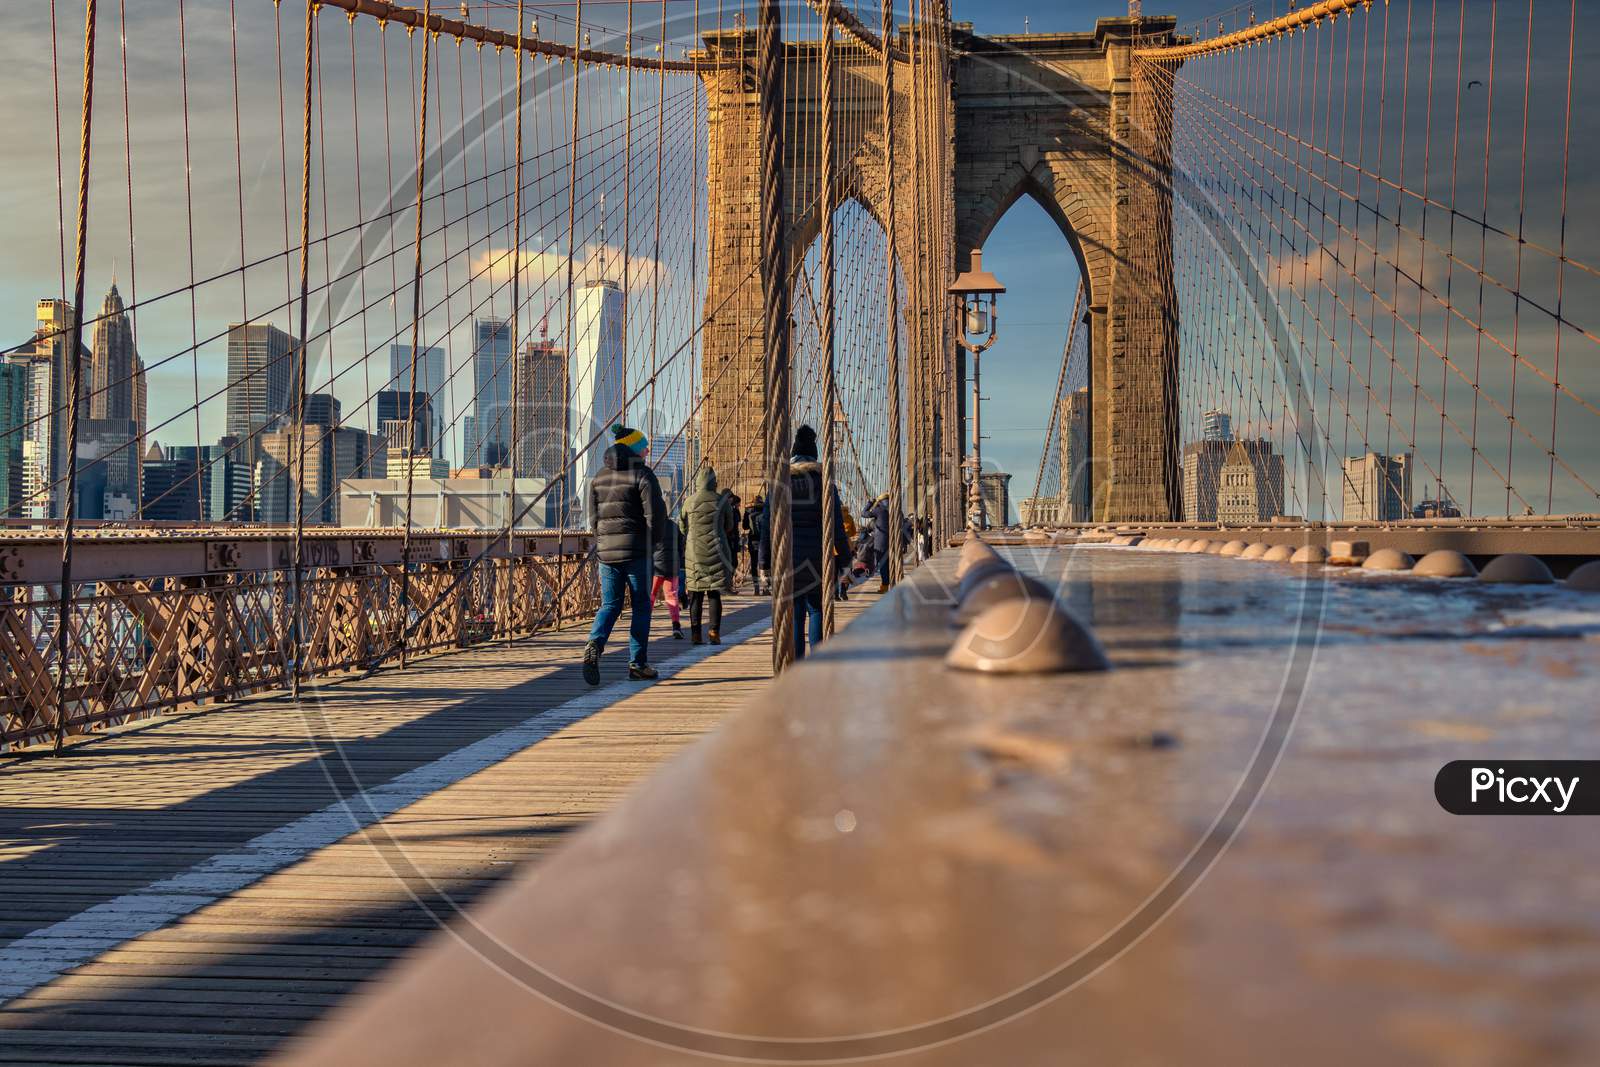 Brooklyn Bridge daylight view with people walking on the bridge ,skyline and clouds in sky in background